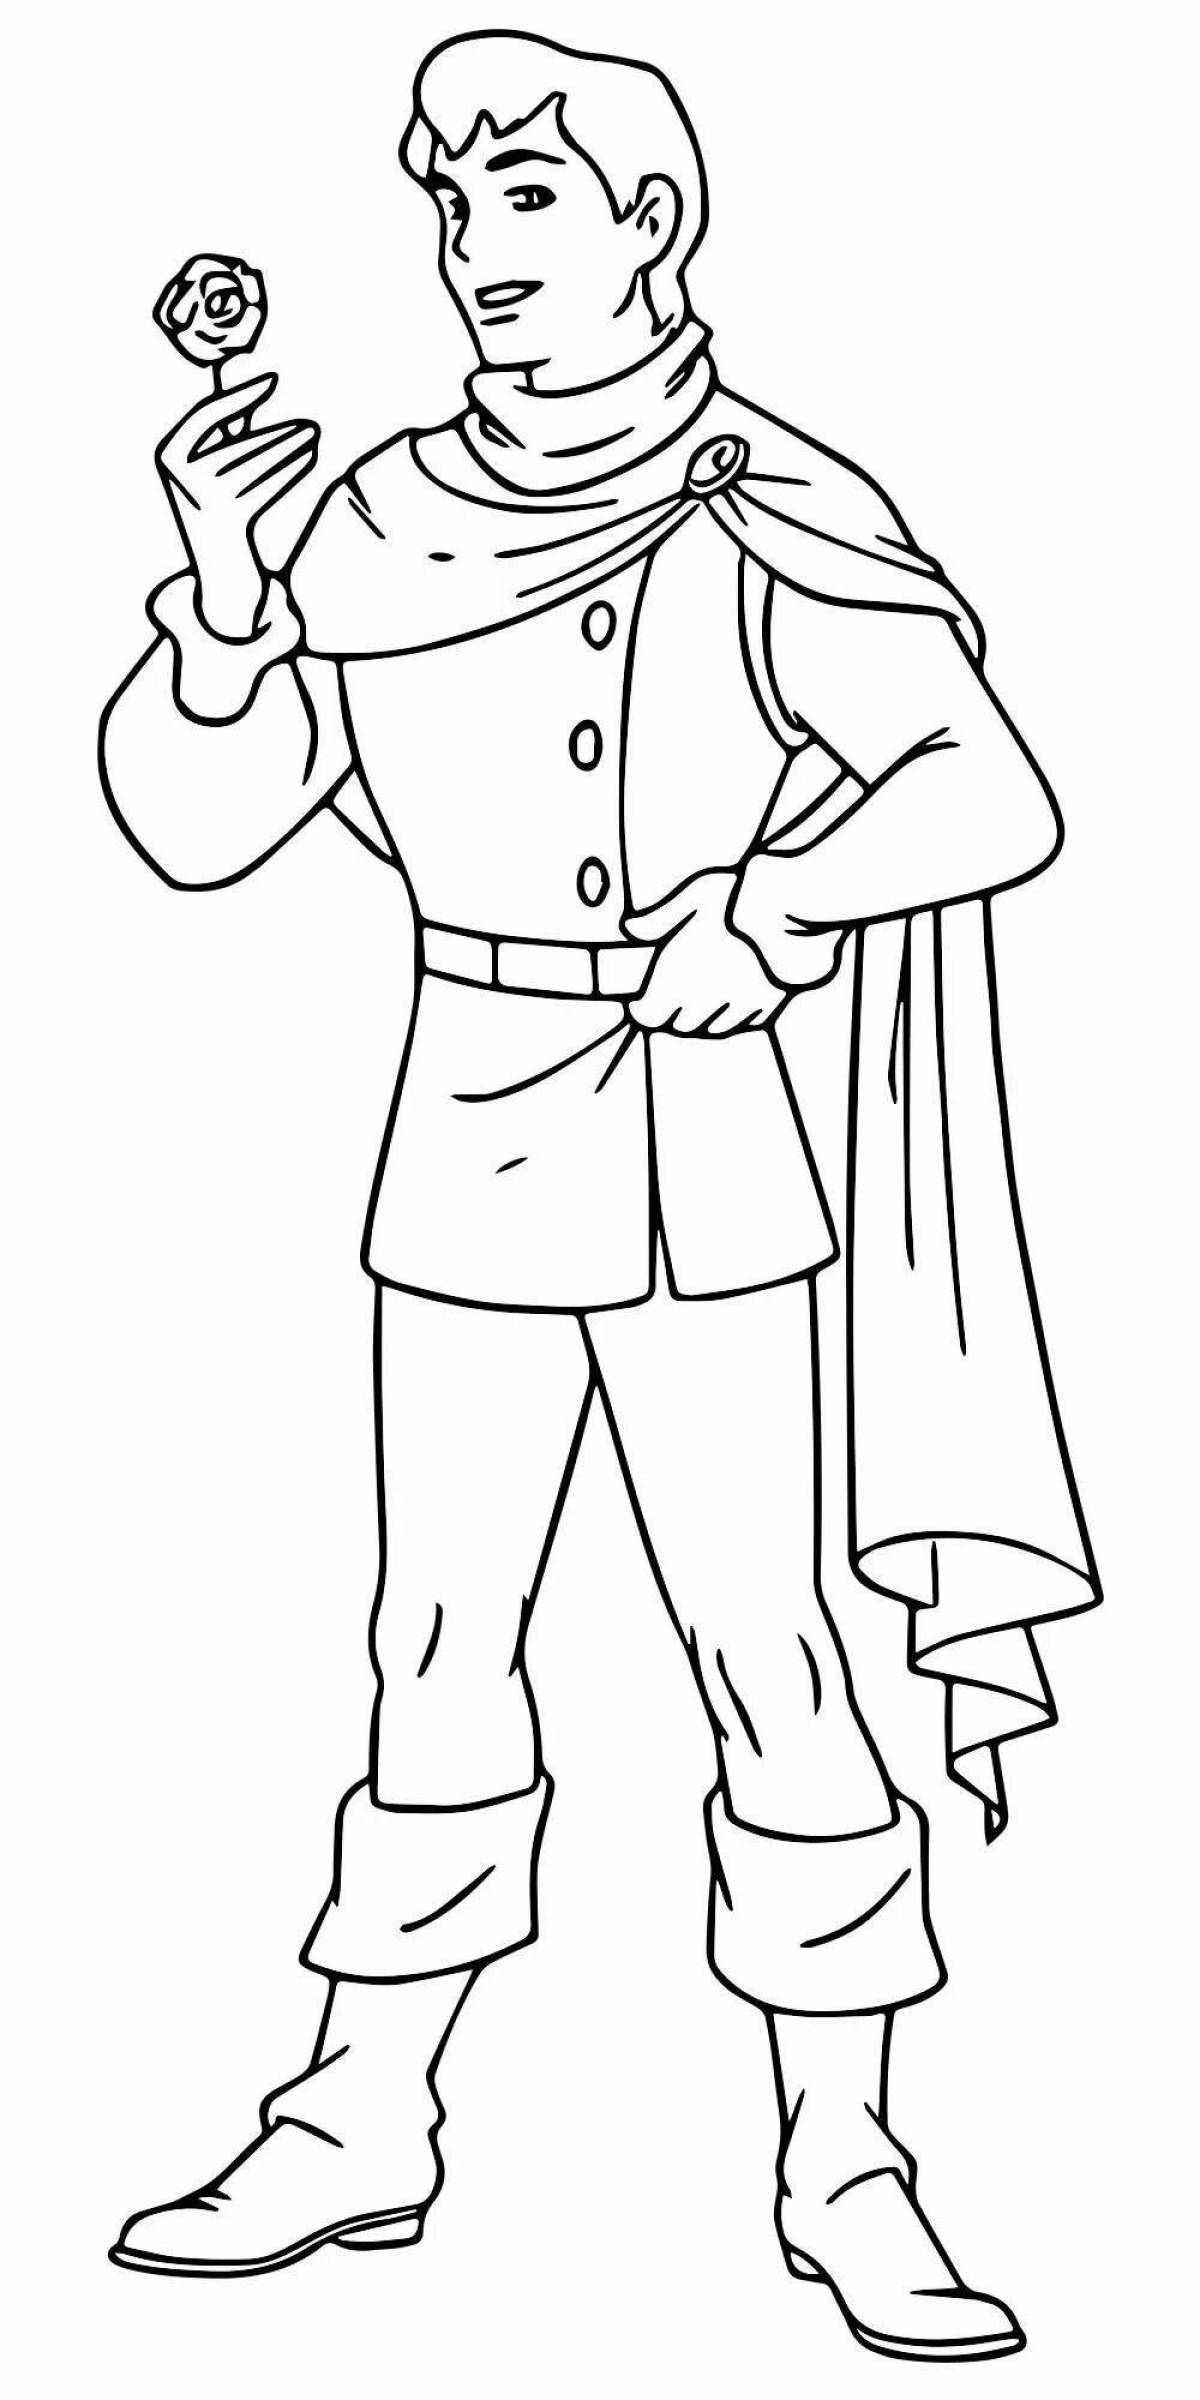 Prince Charming coloring book for kids